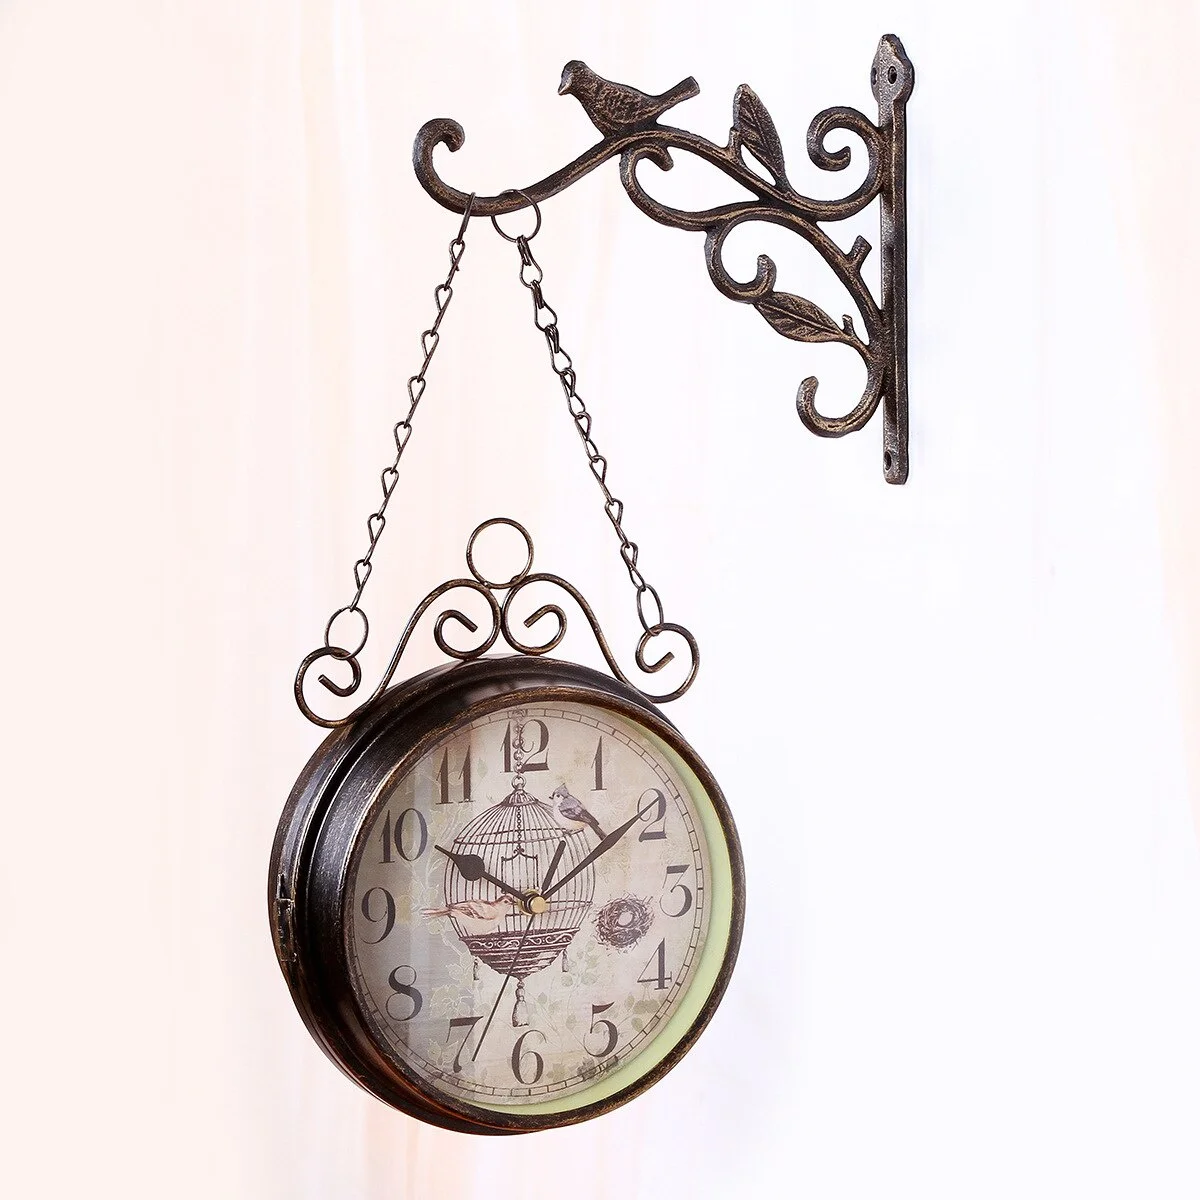 Antique Outdoor Garden Wall Station Metal Clock Double Sided Bird Vintage Retro Round Wall Mount Hanging Home Decor